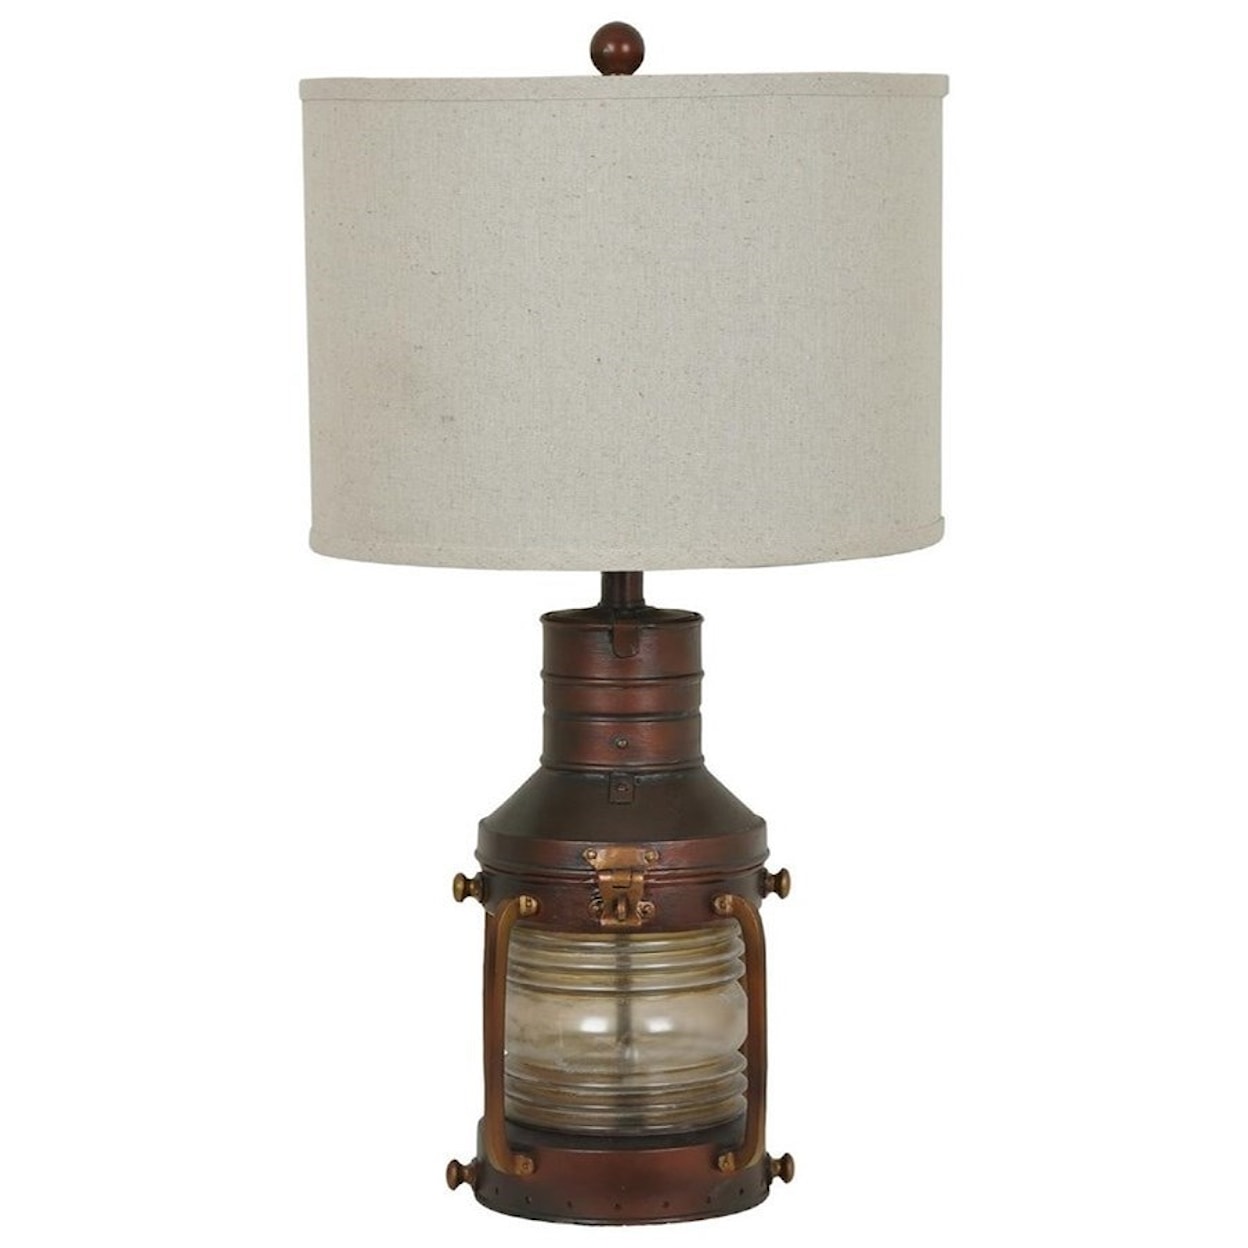 Crestview Collection Lighting Copper Lantern Table Lamp